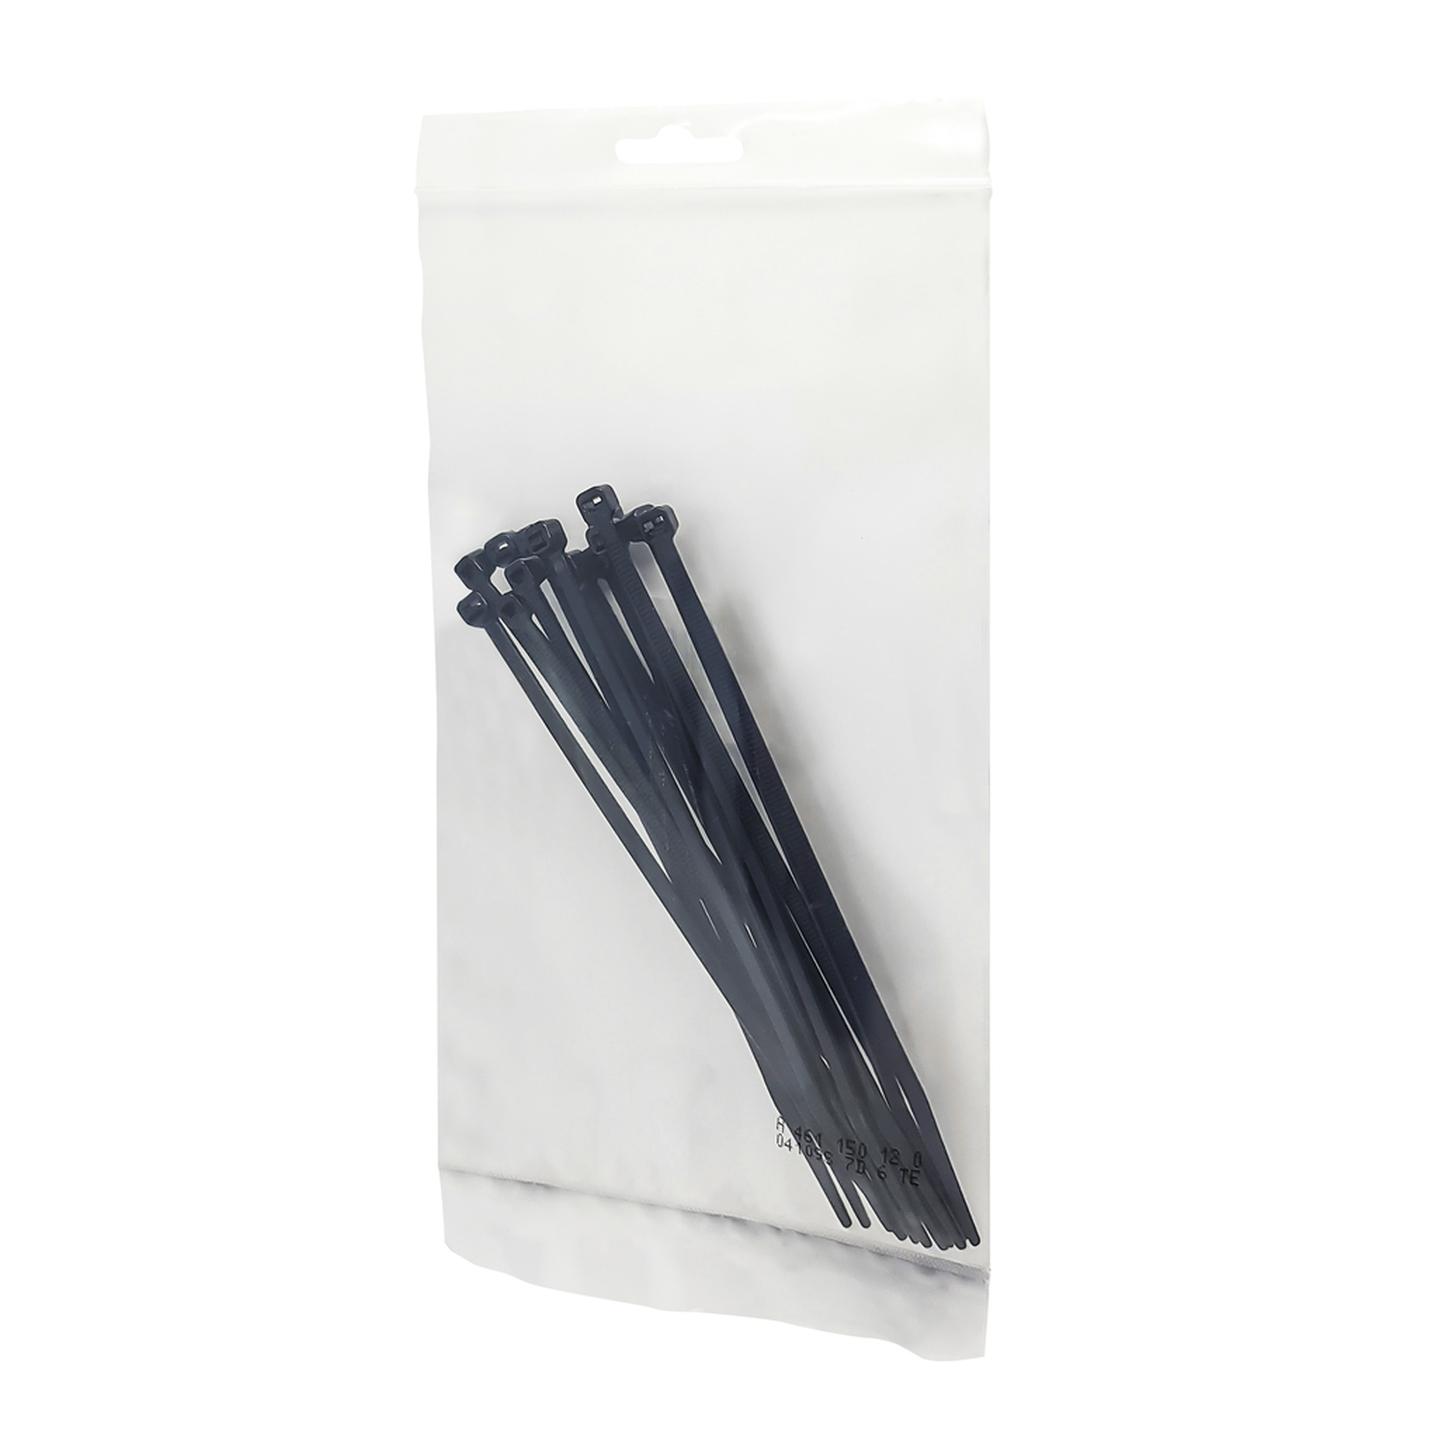 150mm Black Cable Ties - Pack of 15